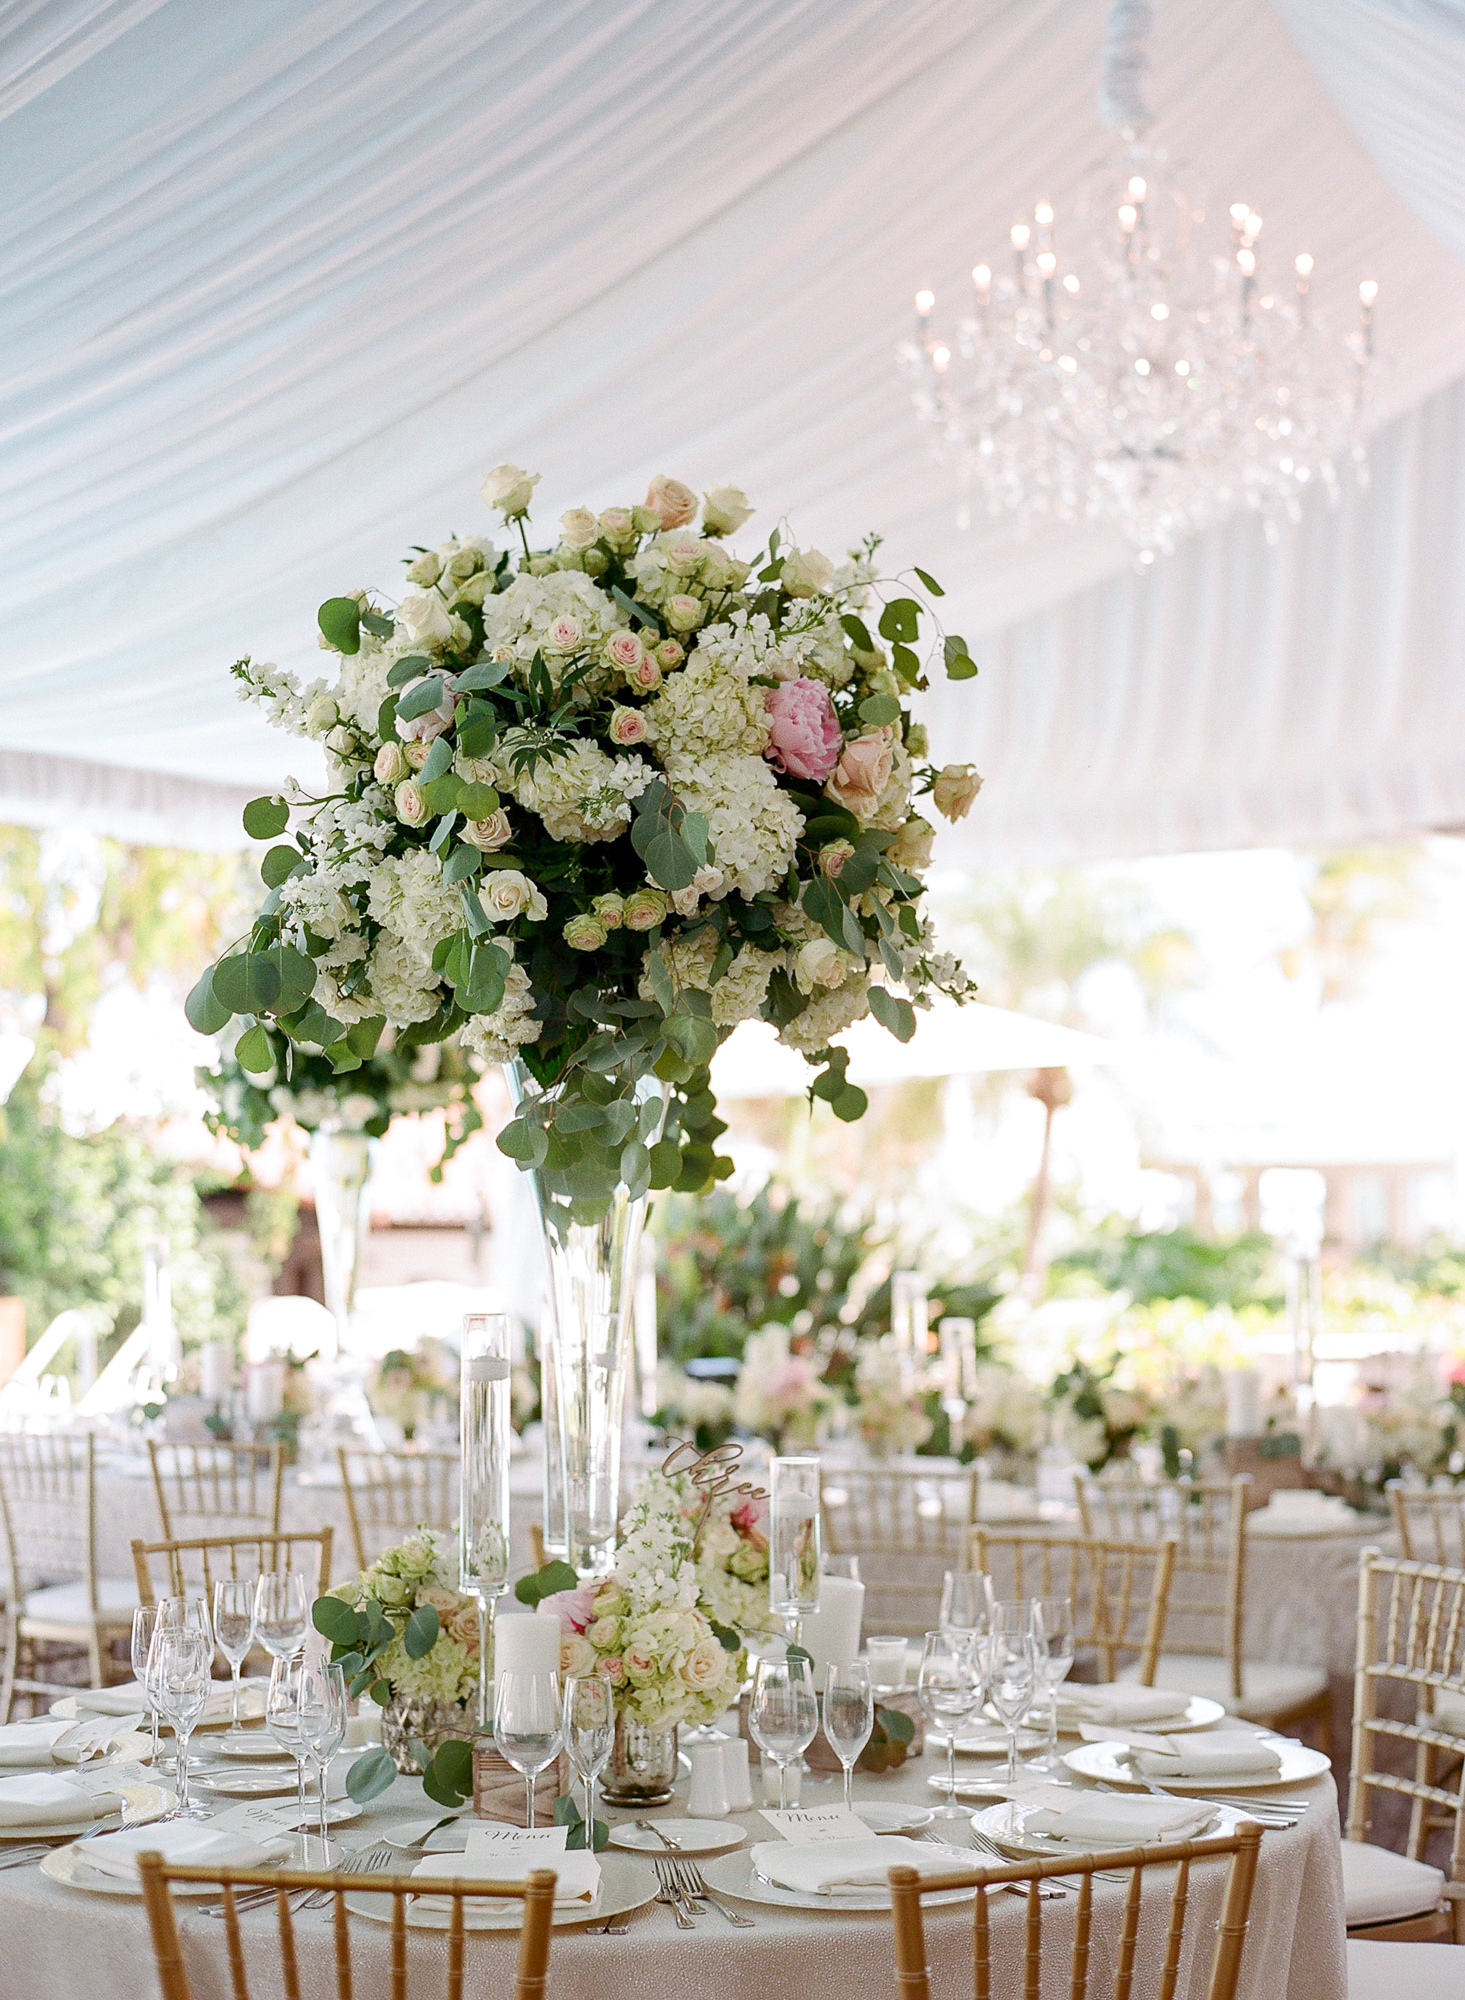 The fisher island club terrace was carpeted and featured a mix of long royal tables and round guest tables. The centerpieces used eucalyptus and wood boxes for a very French feel. Glass vases added a clean and modern touch | fisher island club, fisher island wedding, south florida wedding planner, florida wedding